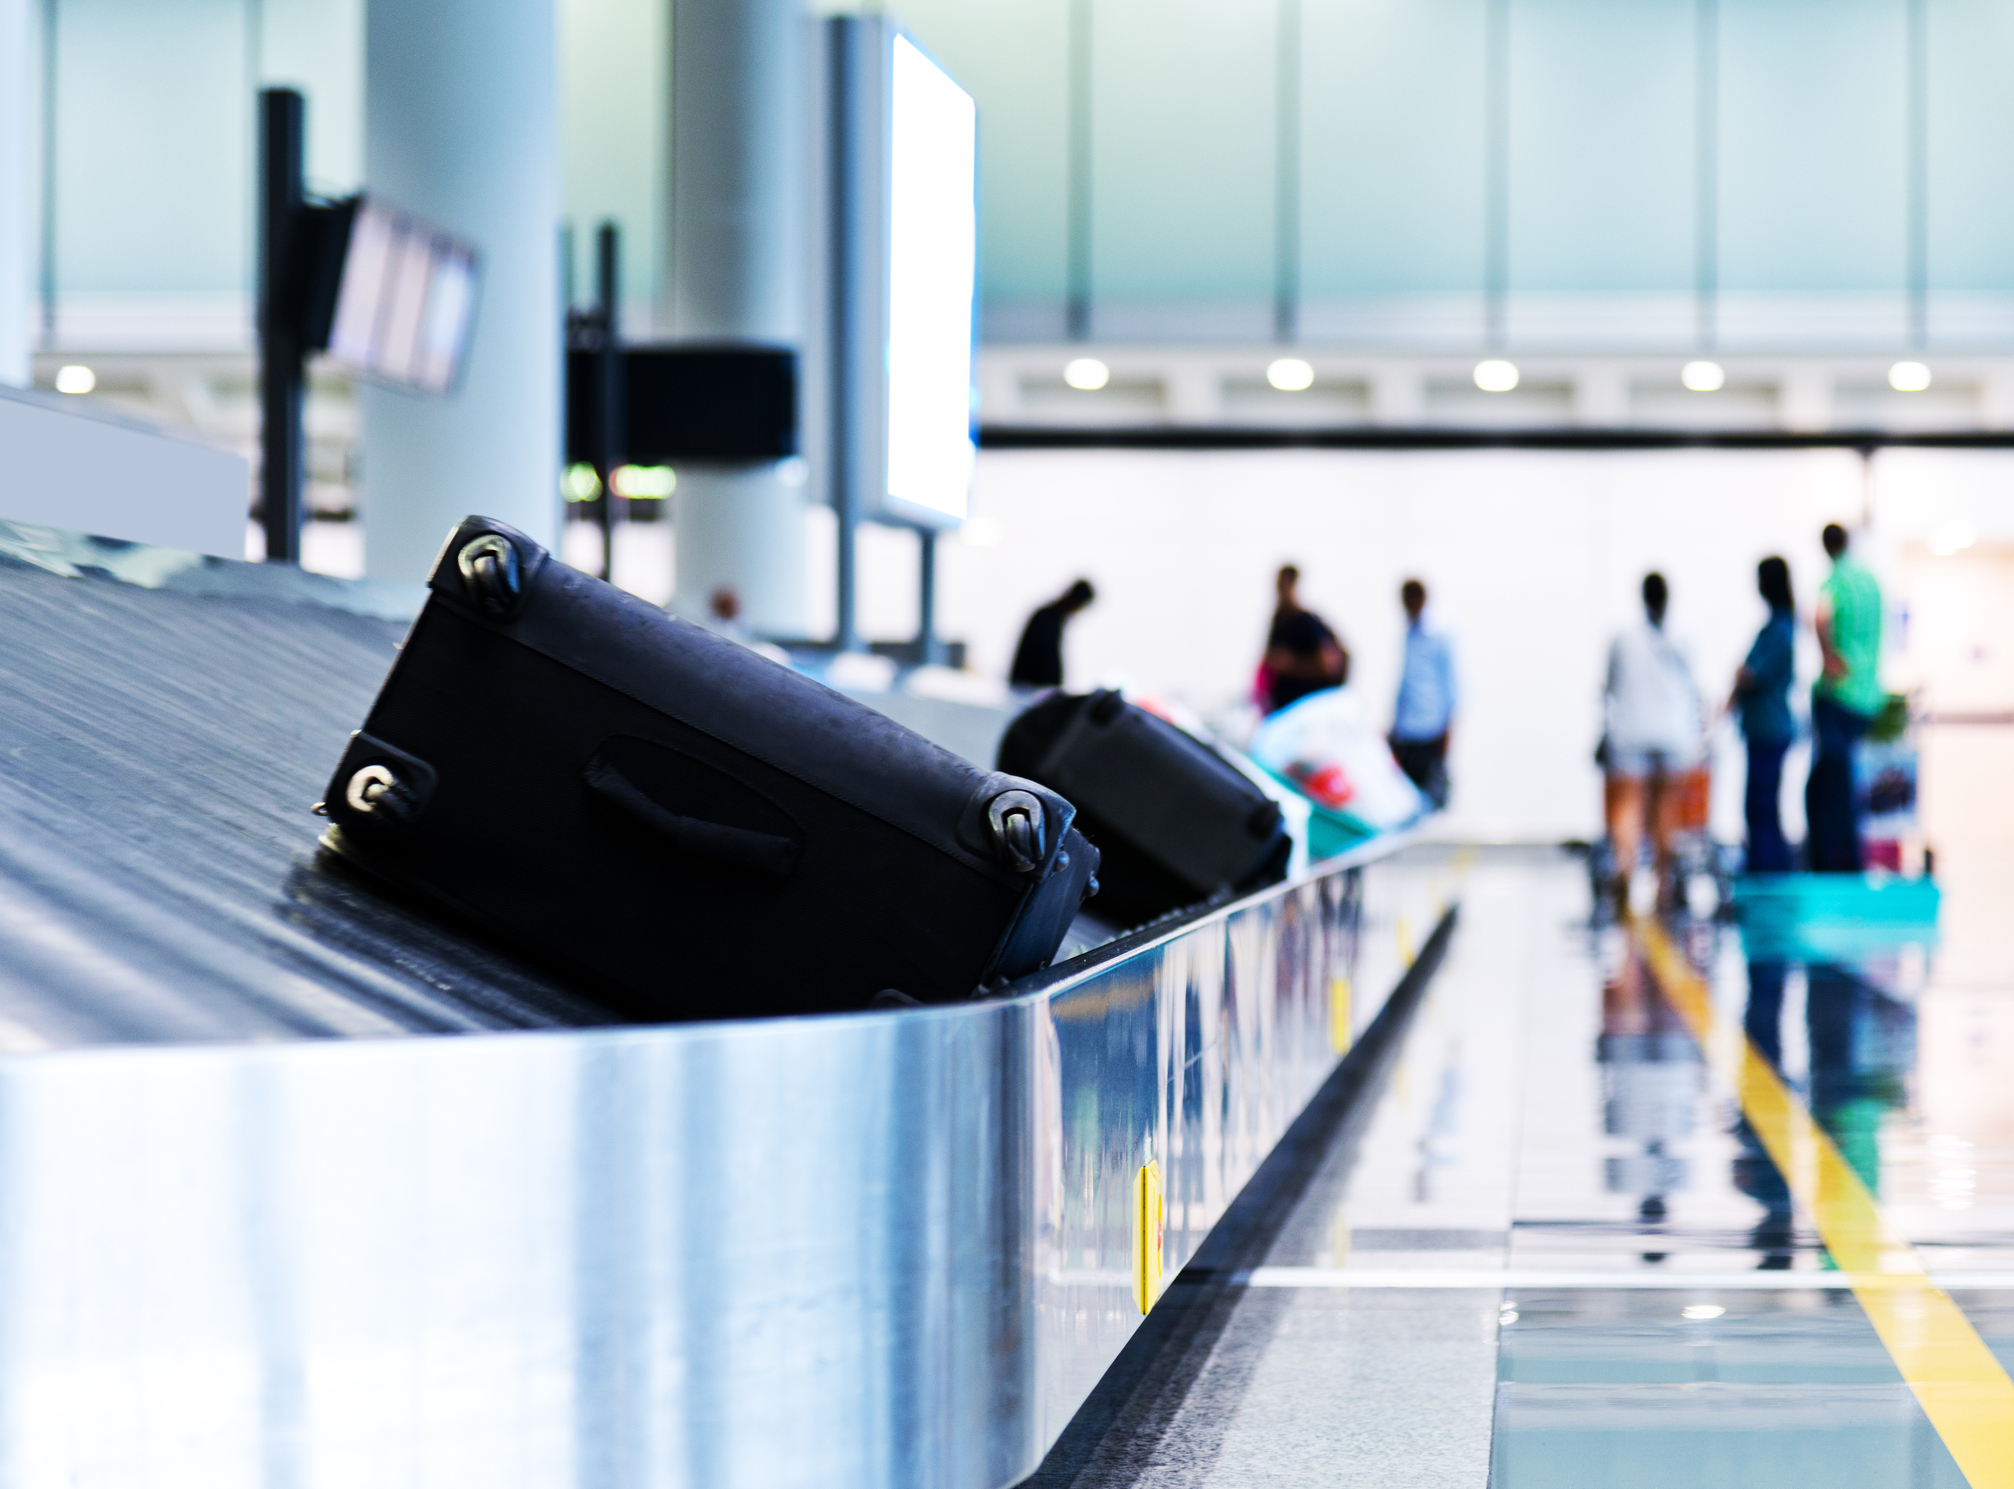 airport baggage carousel with two black suitcases in foreground and several people waiting in background